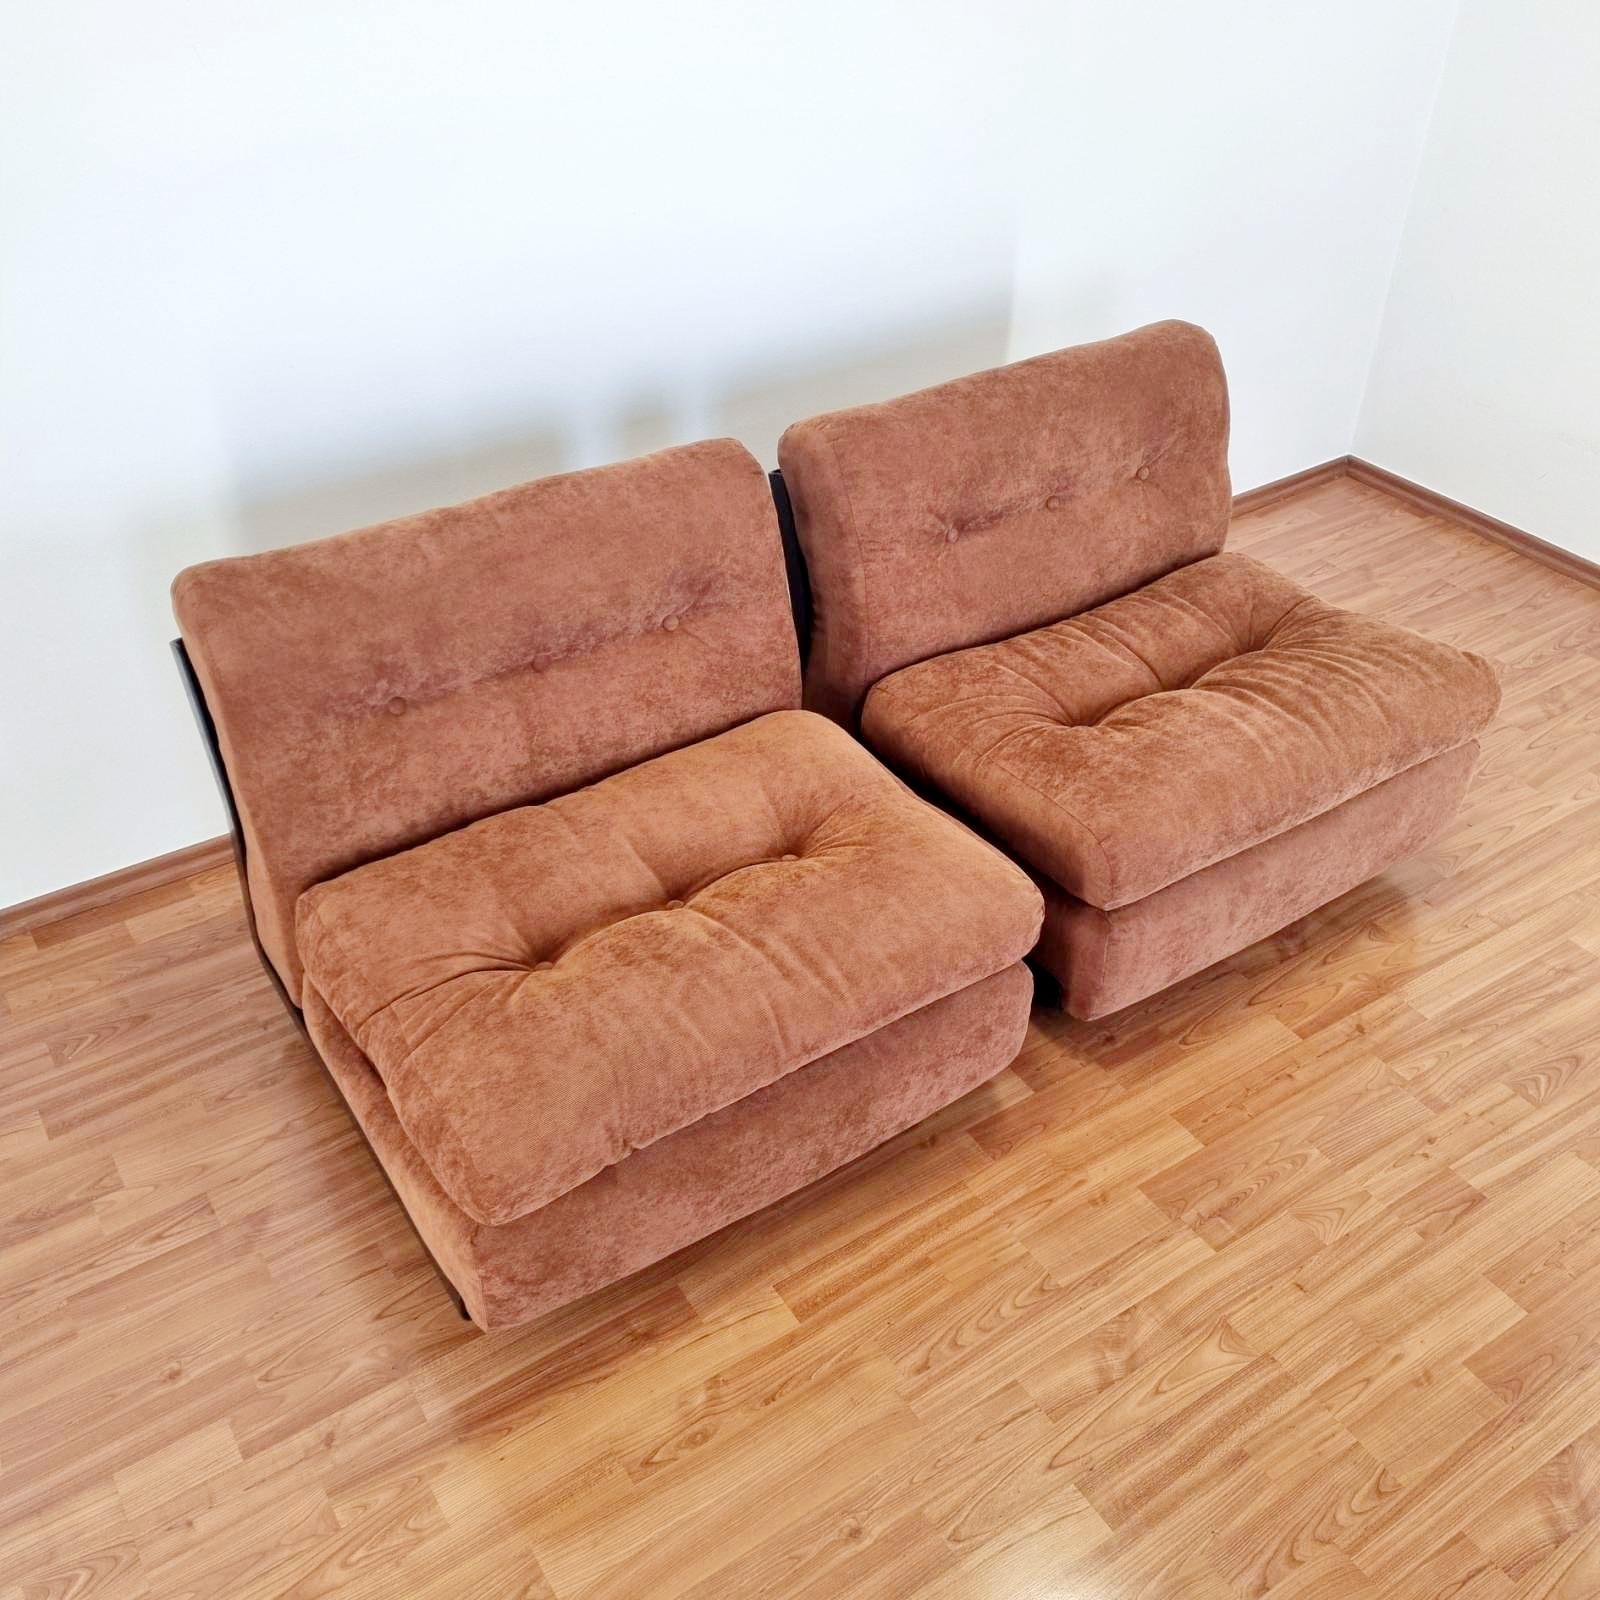 Mid Century Amanta modular sofa, made in the 70s in Italy.
Designed by Mario Bellini for C&B Italy.
Pair
In good vintage condition with some minor traces of use and age on the plastic part. New fabric. They were recently reupholstered.